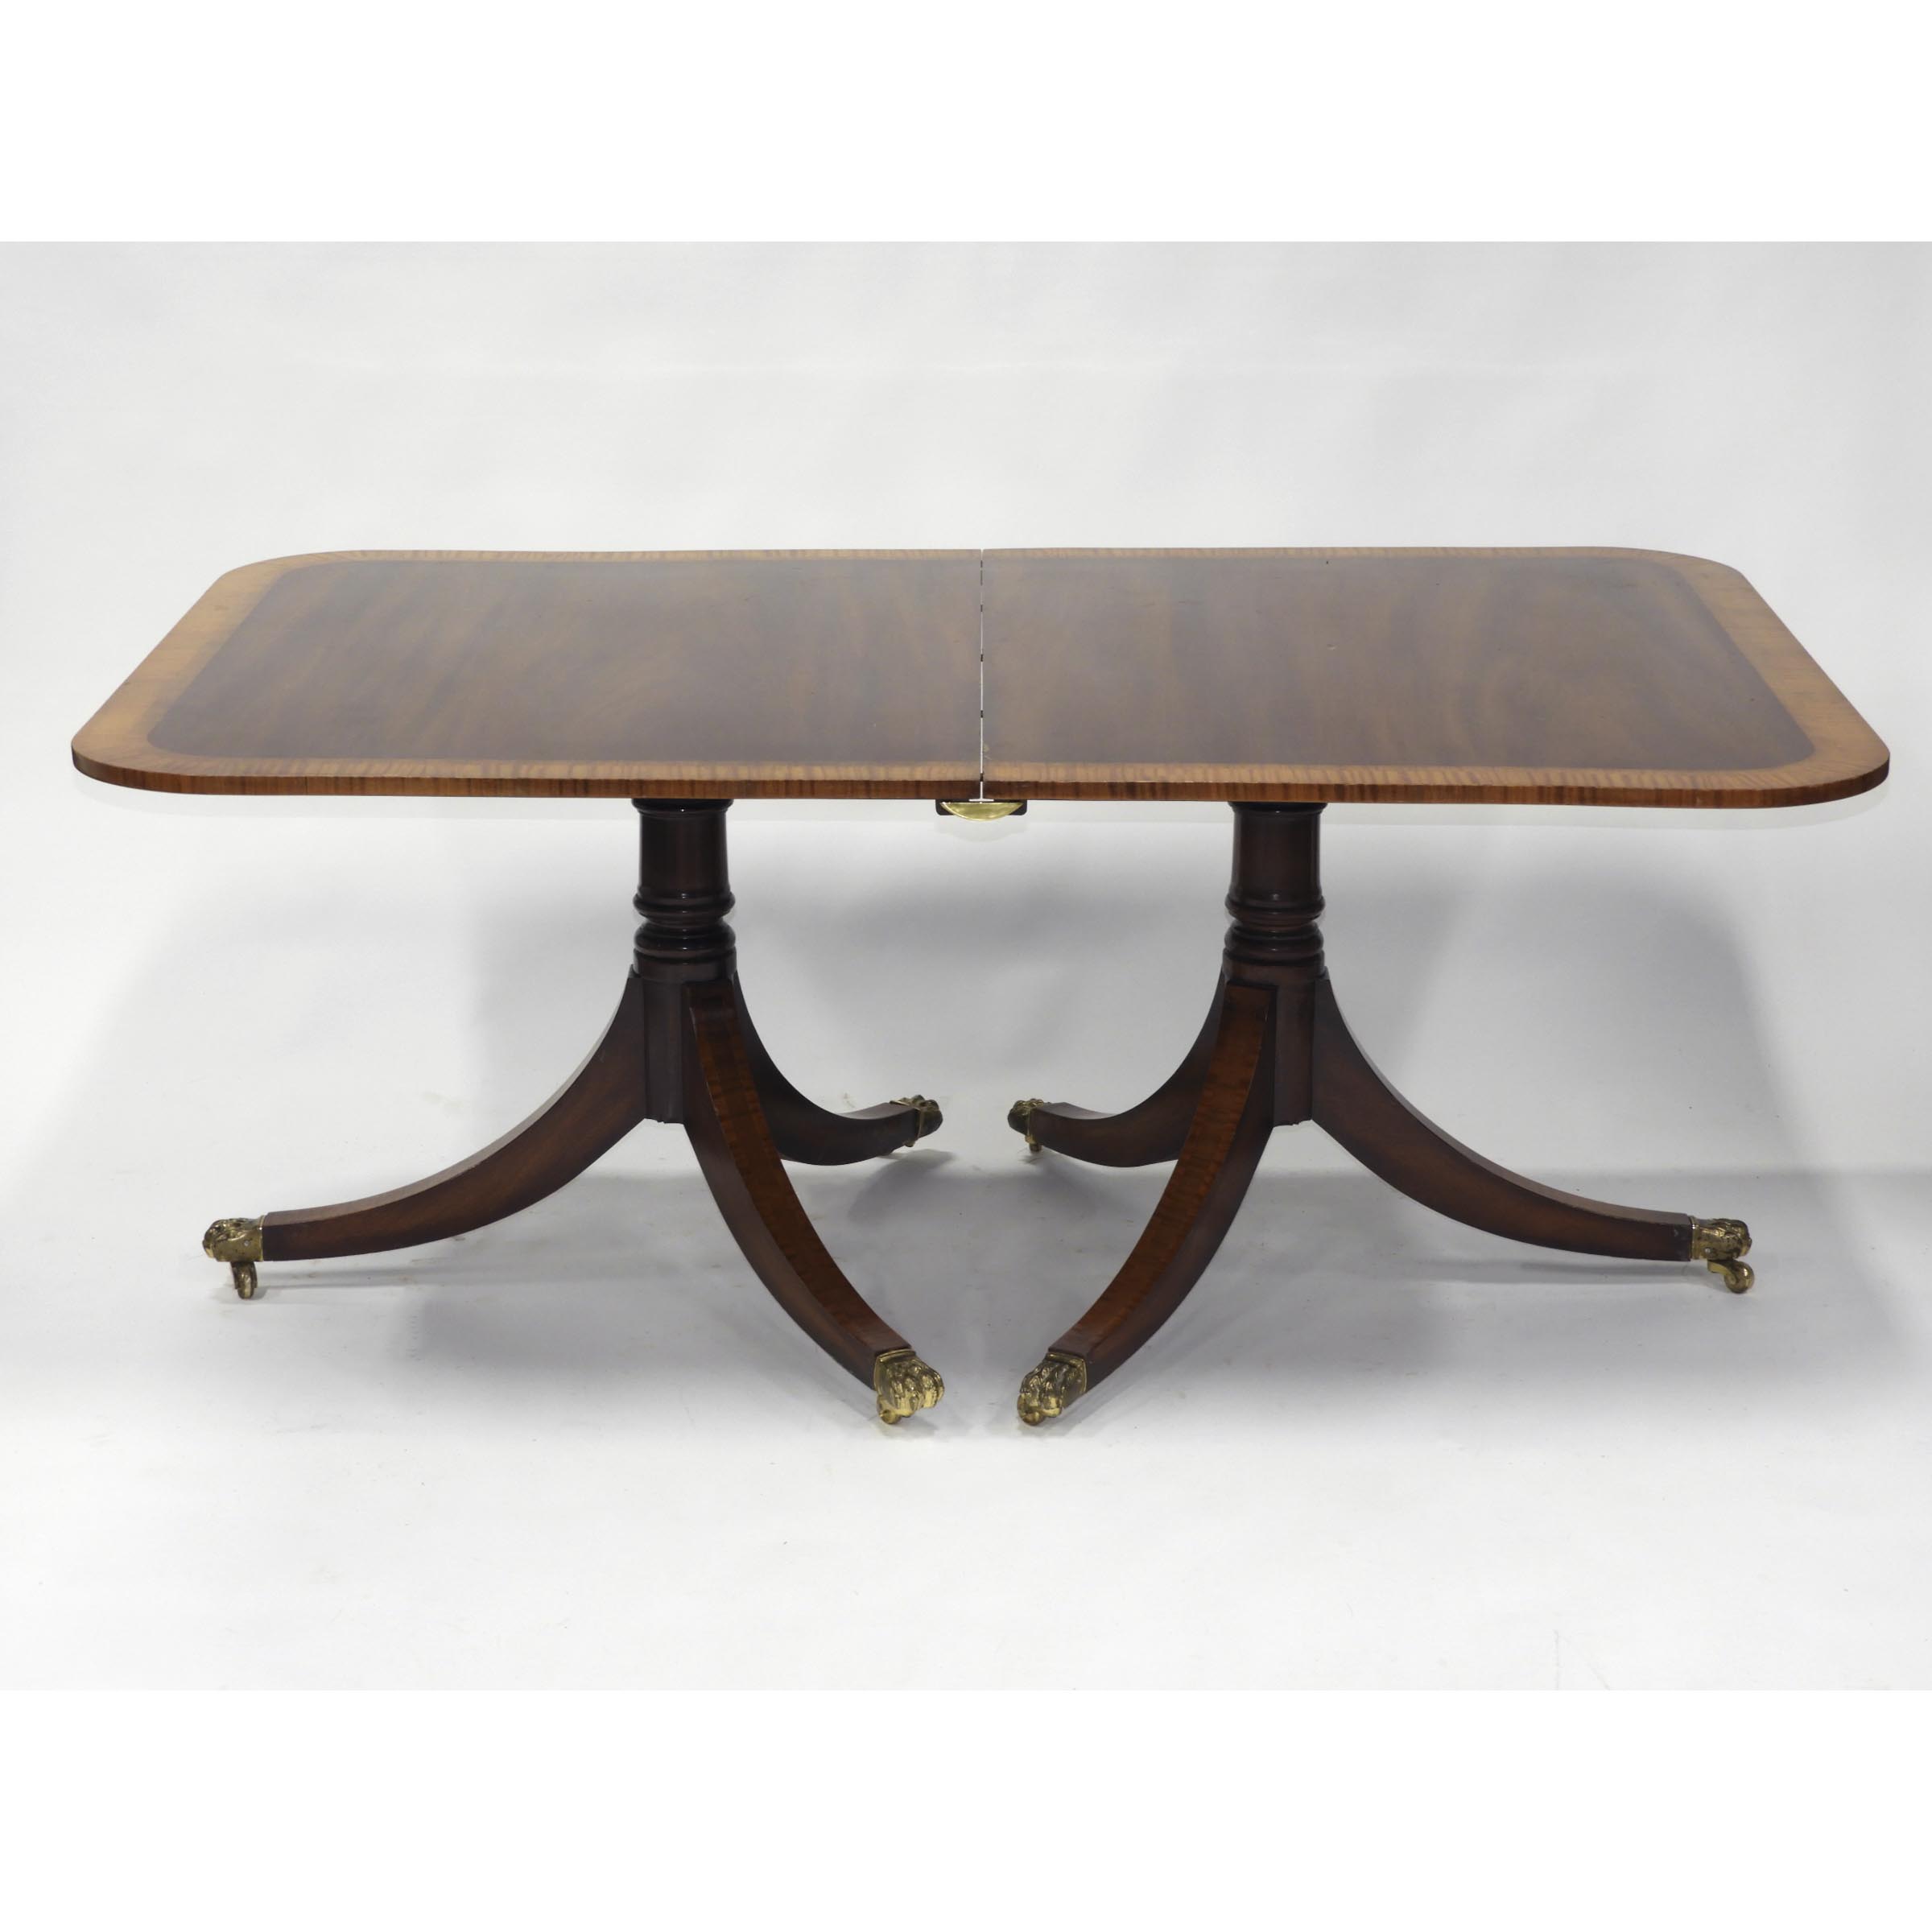 English Regency Style Double Pedestal Dining Table, 20th century